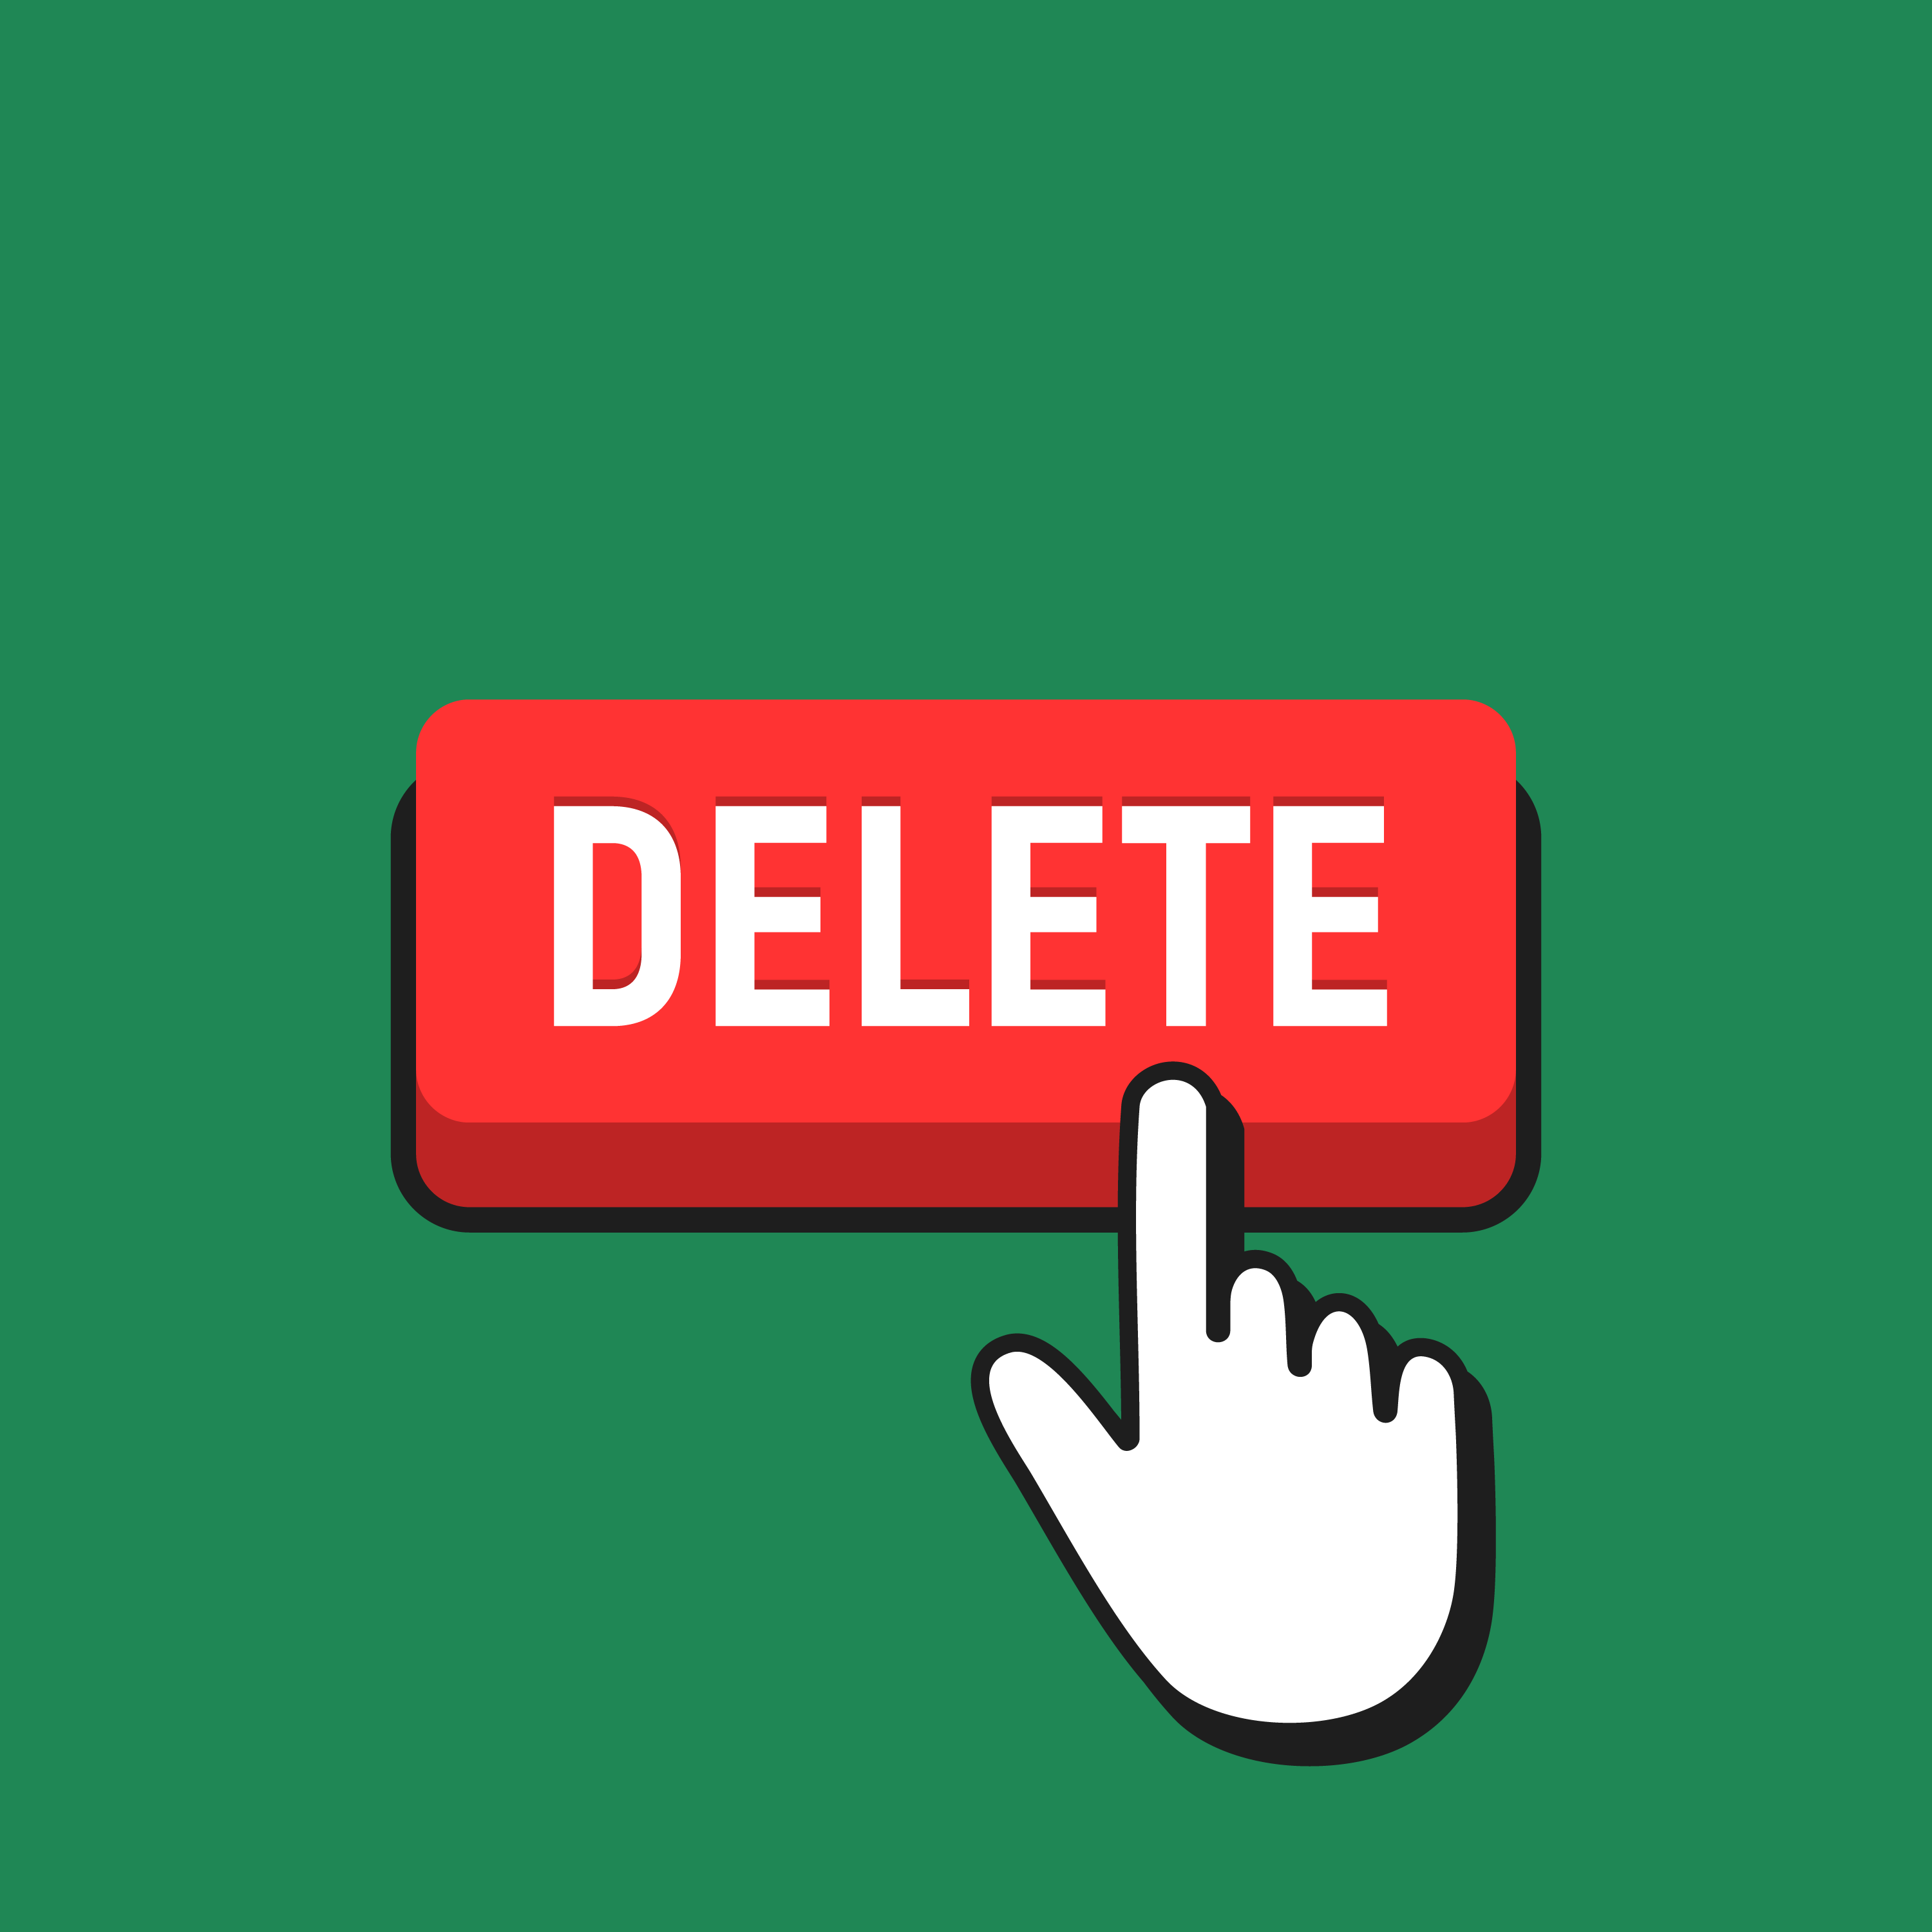 Deleting domains